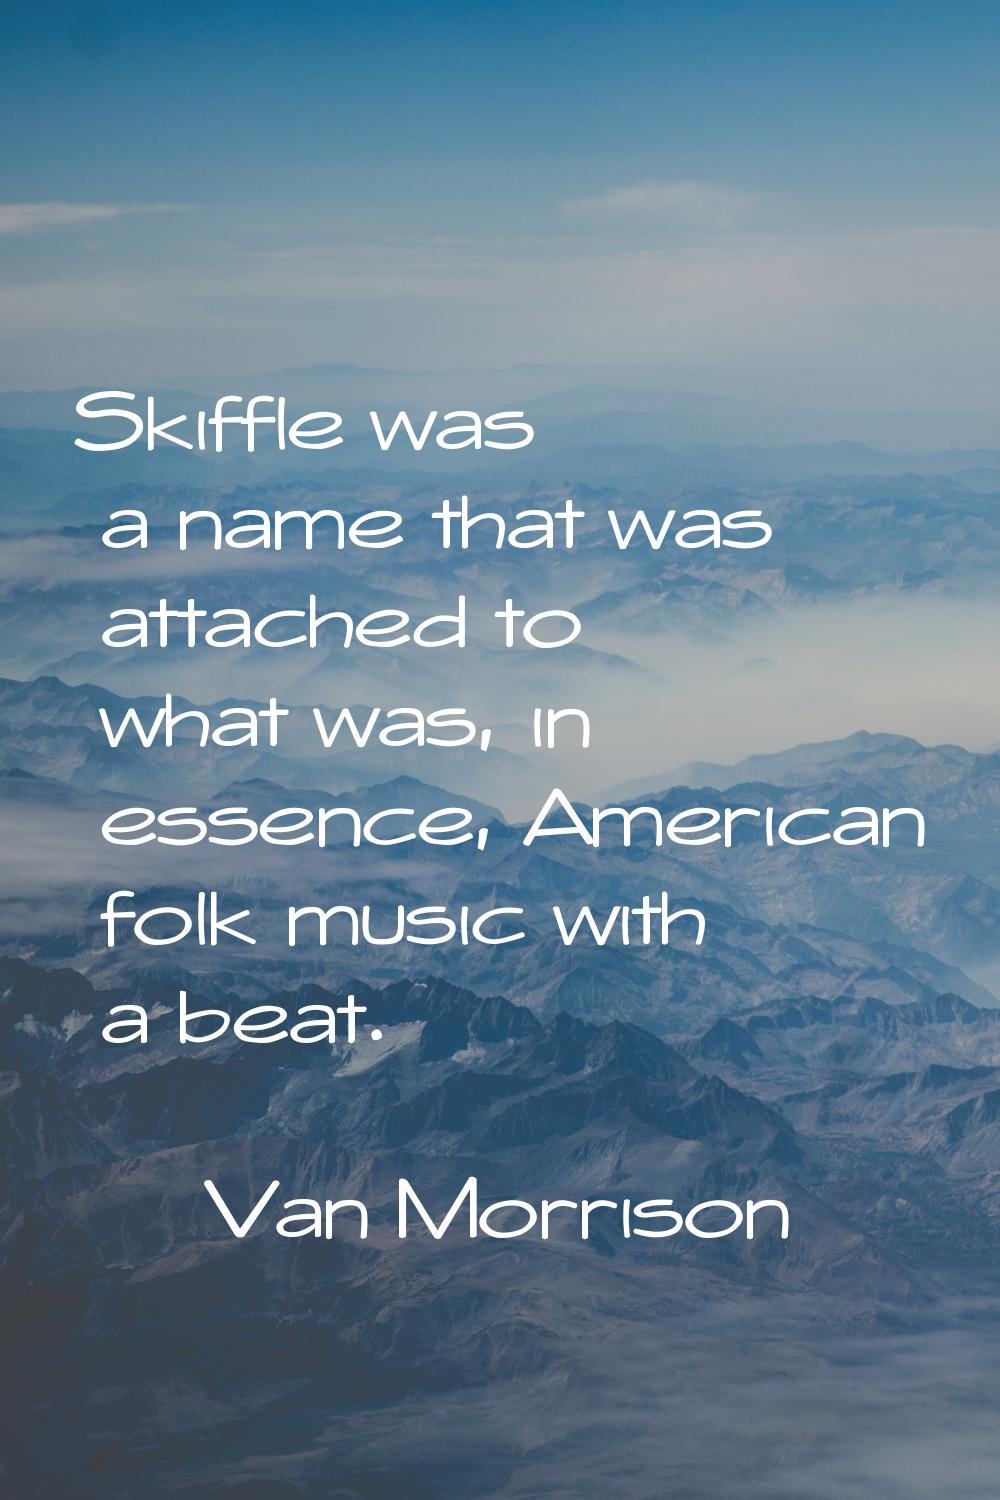 Skiffle was a name that was attached to what was, in essence, American folk music with a beat.